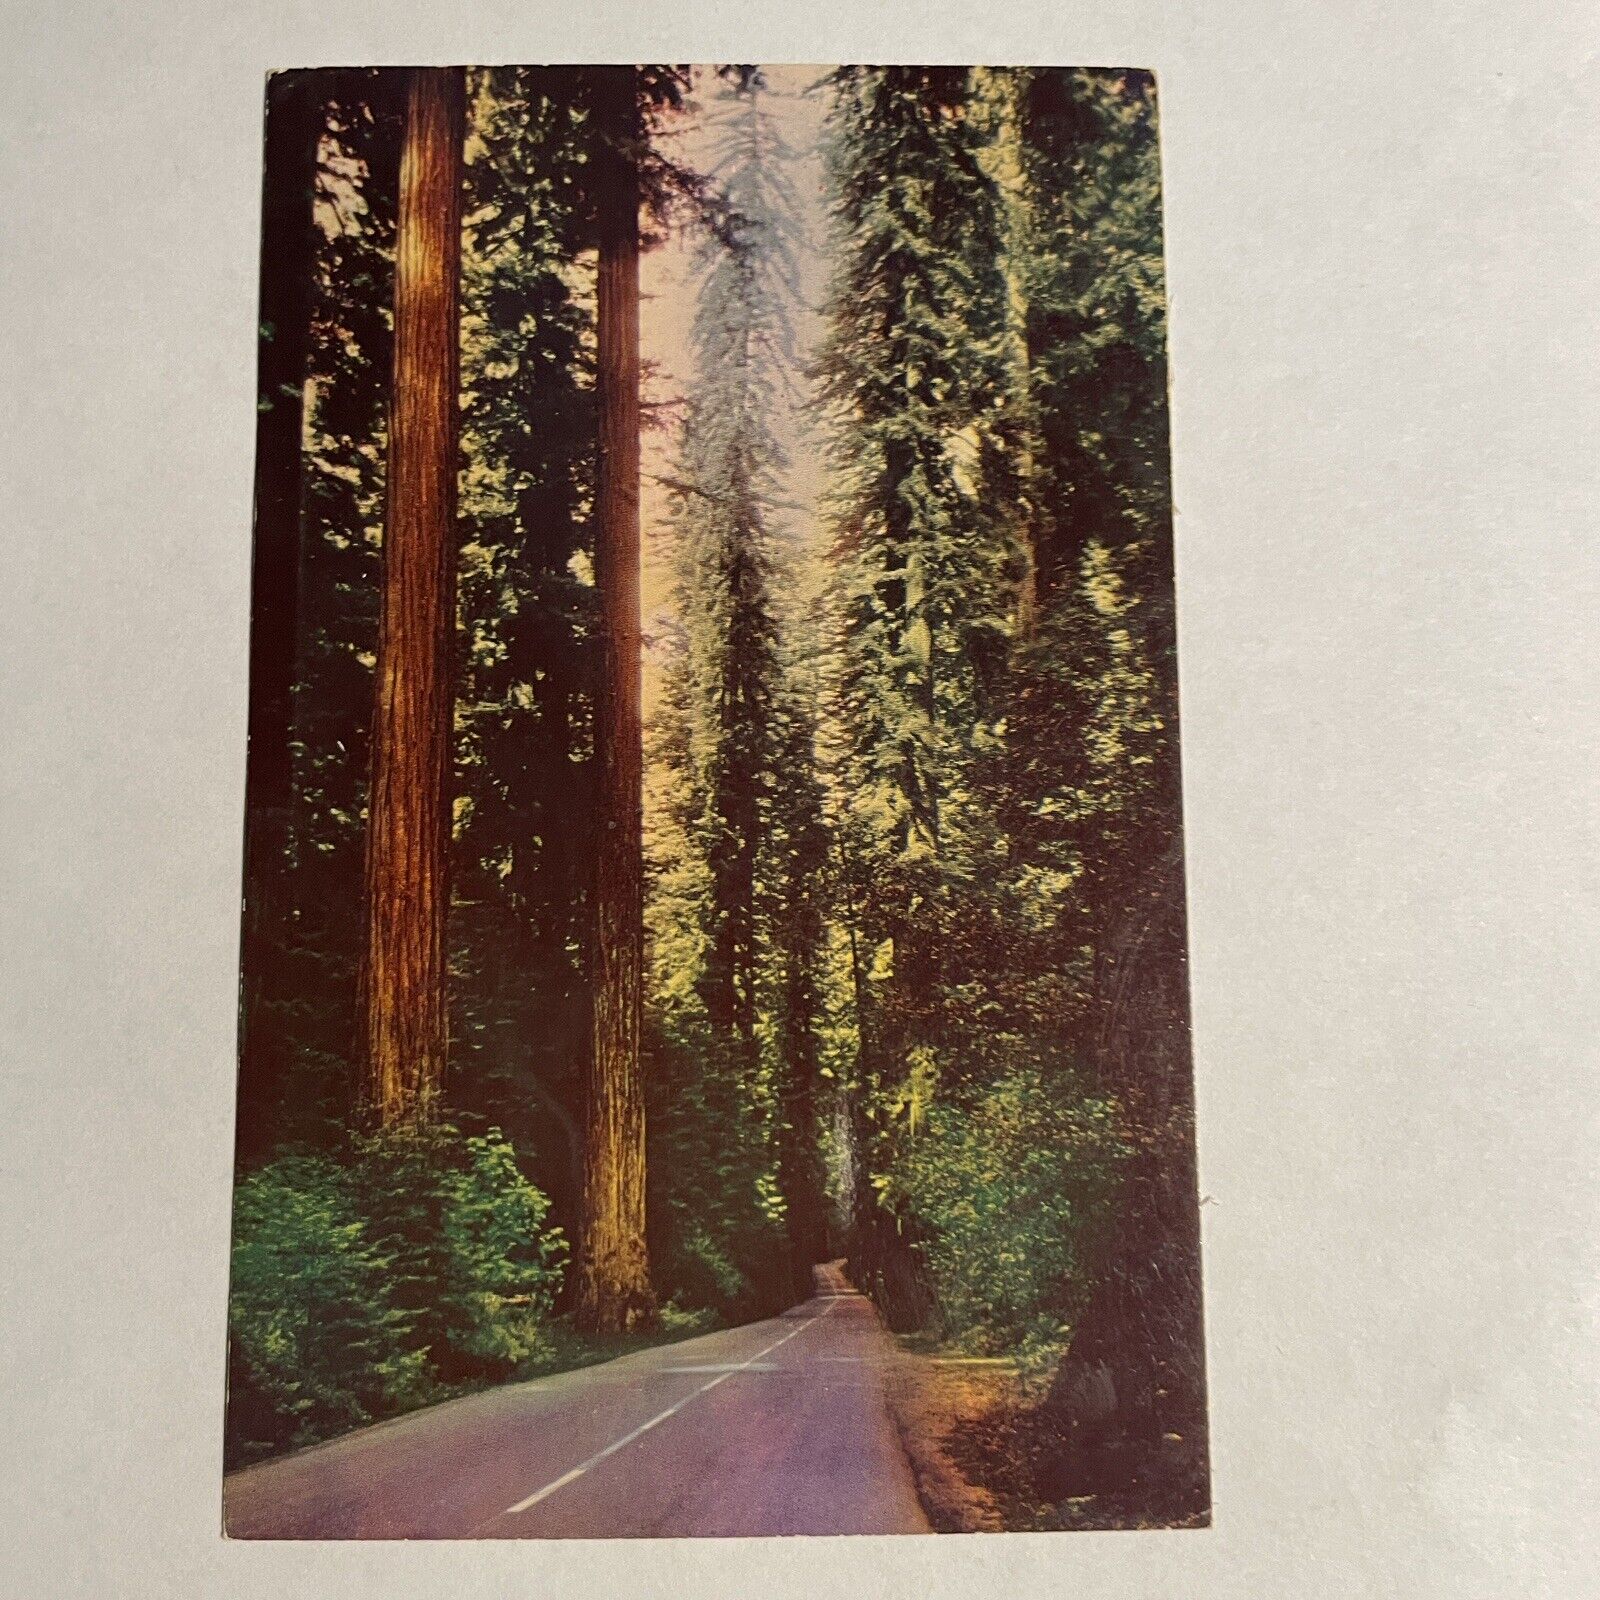 Avenue Of Giants Redwood Highway California with Sempervirens Vintage Postcard